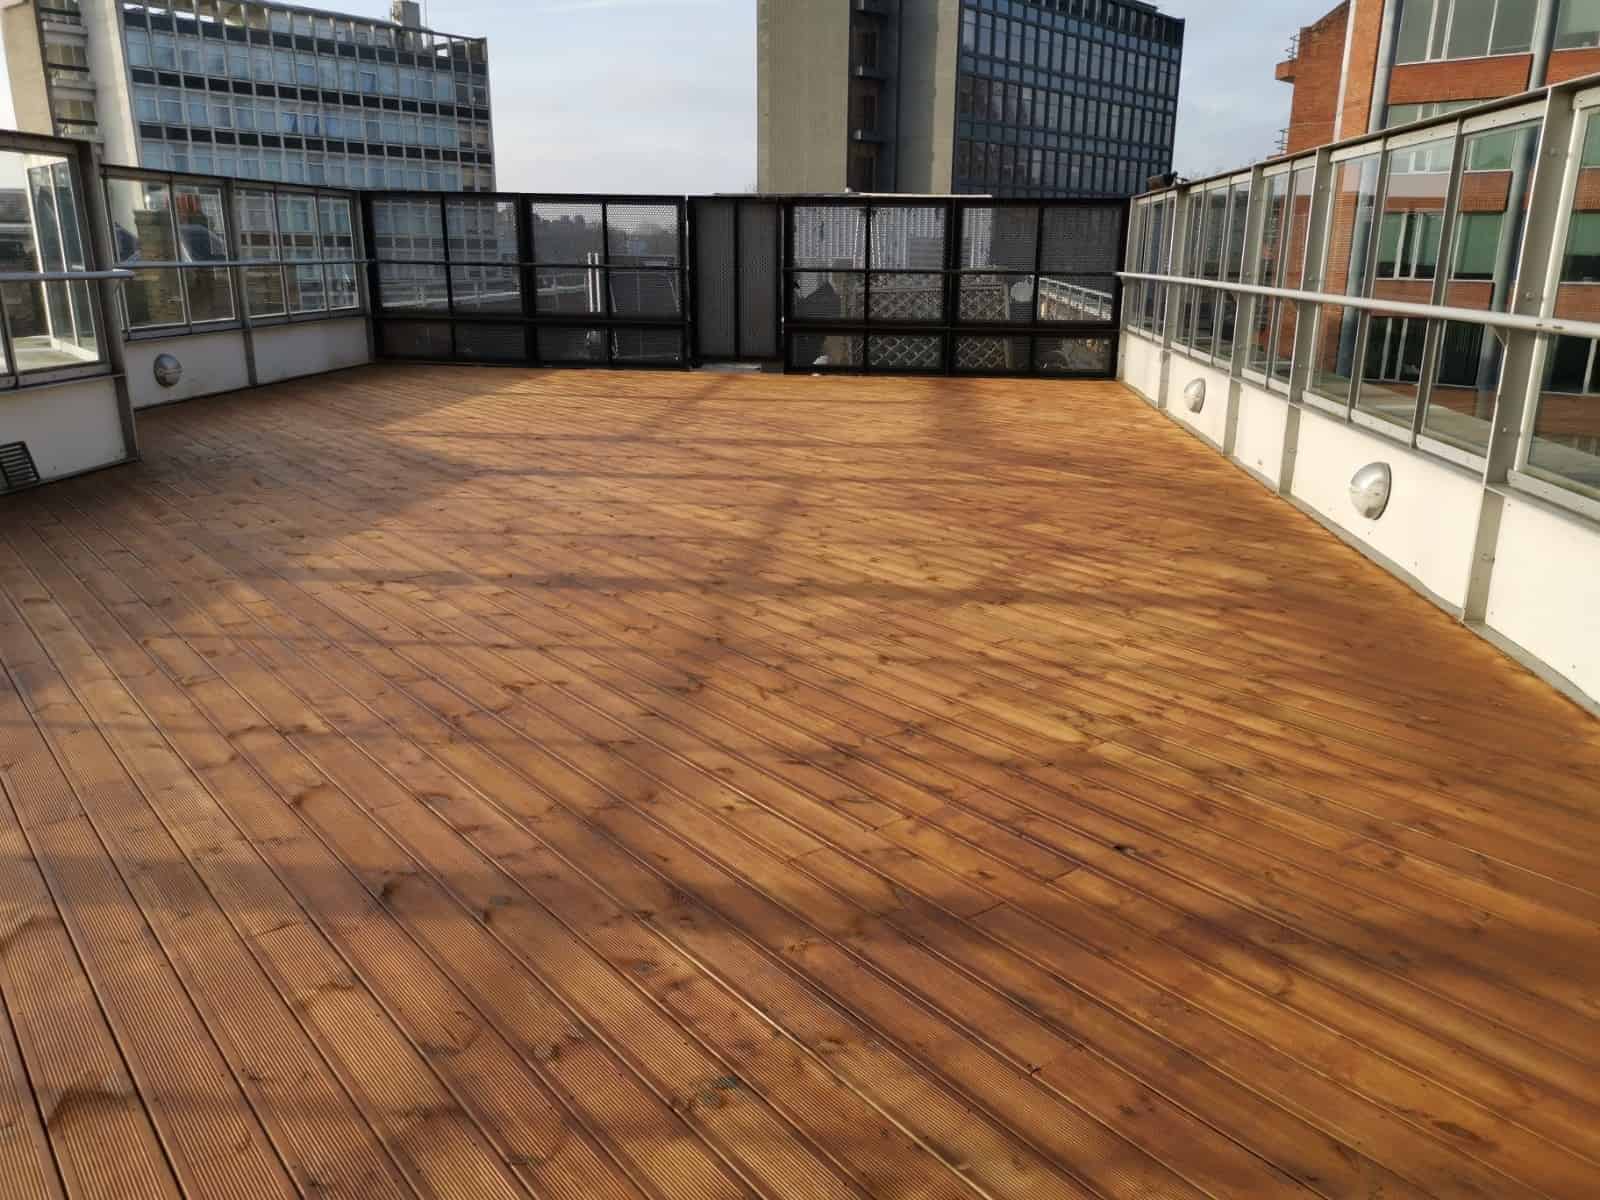 decking office fitted out completed